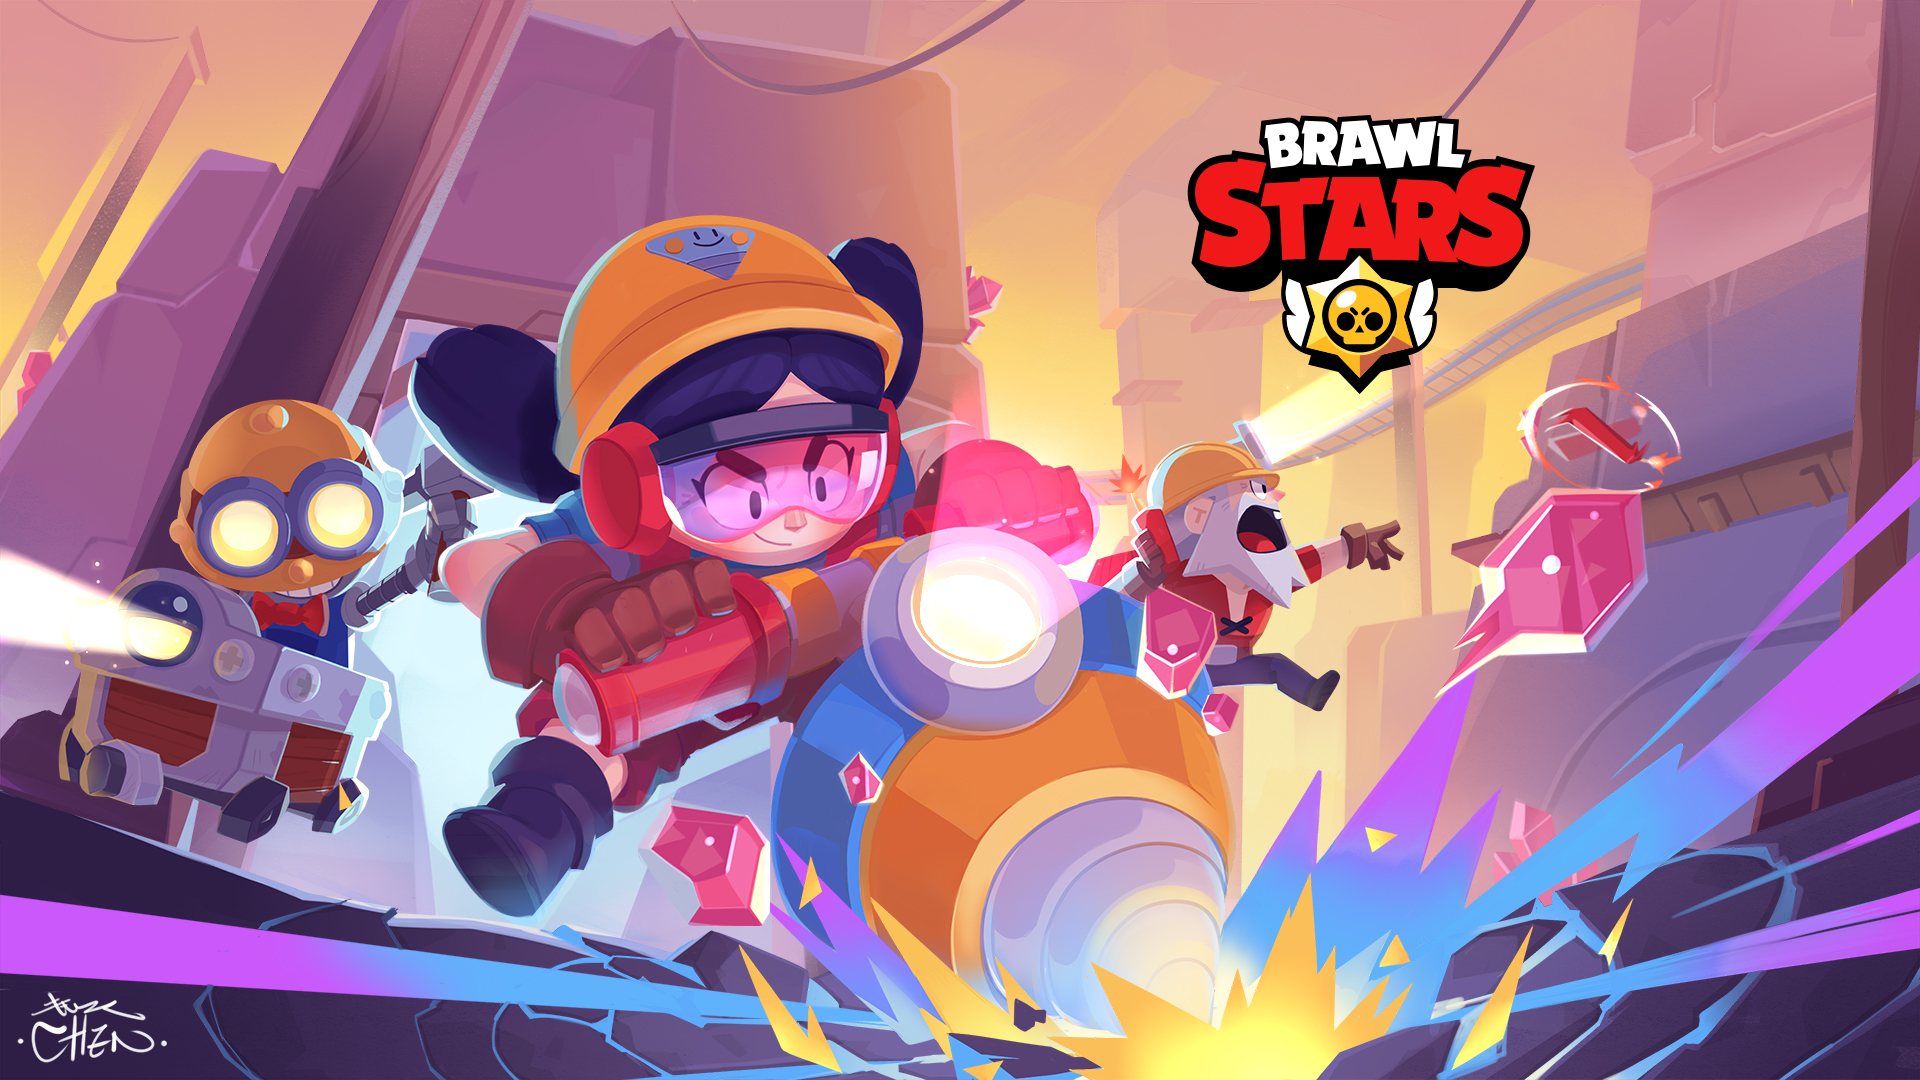 Brawl Stars On Twitter Here Are Some Wallpapers Of Your Favorite Miners - brawl stars bruh